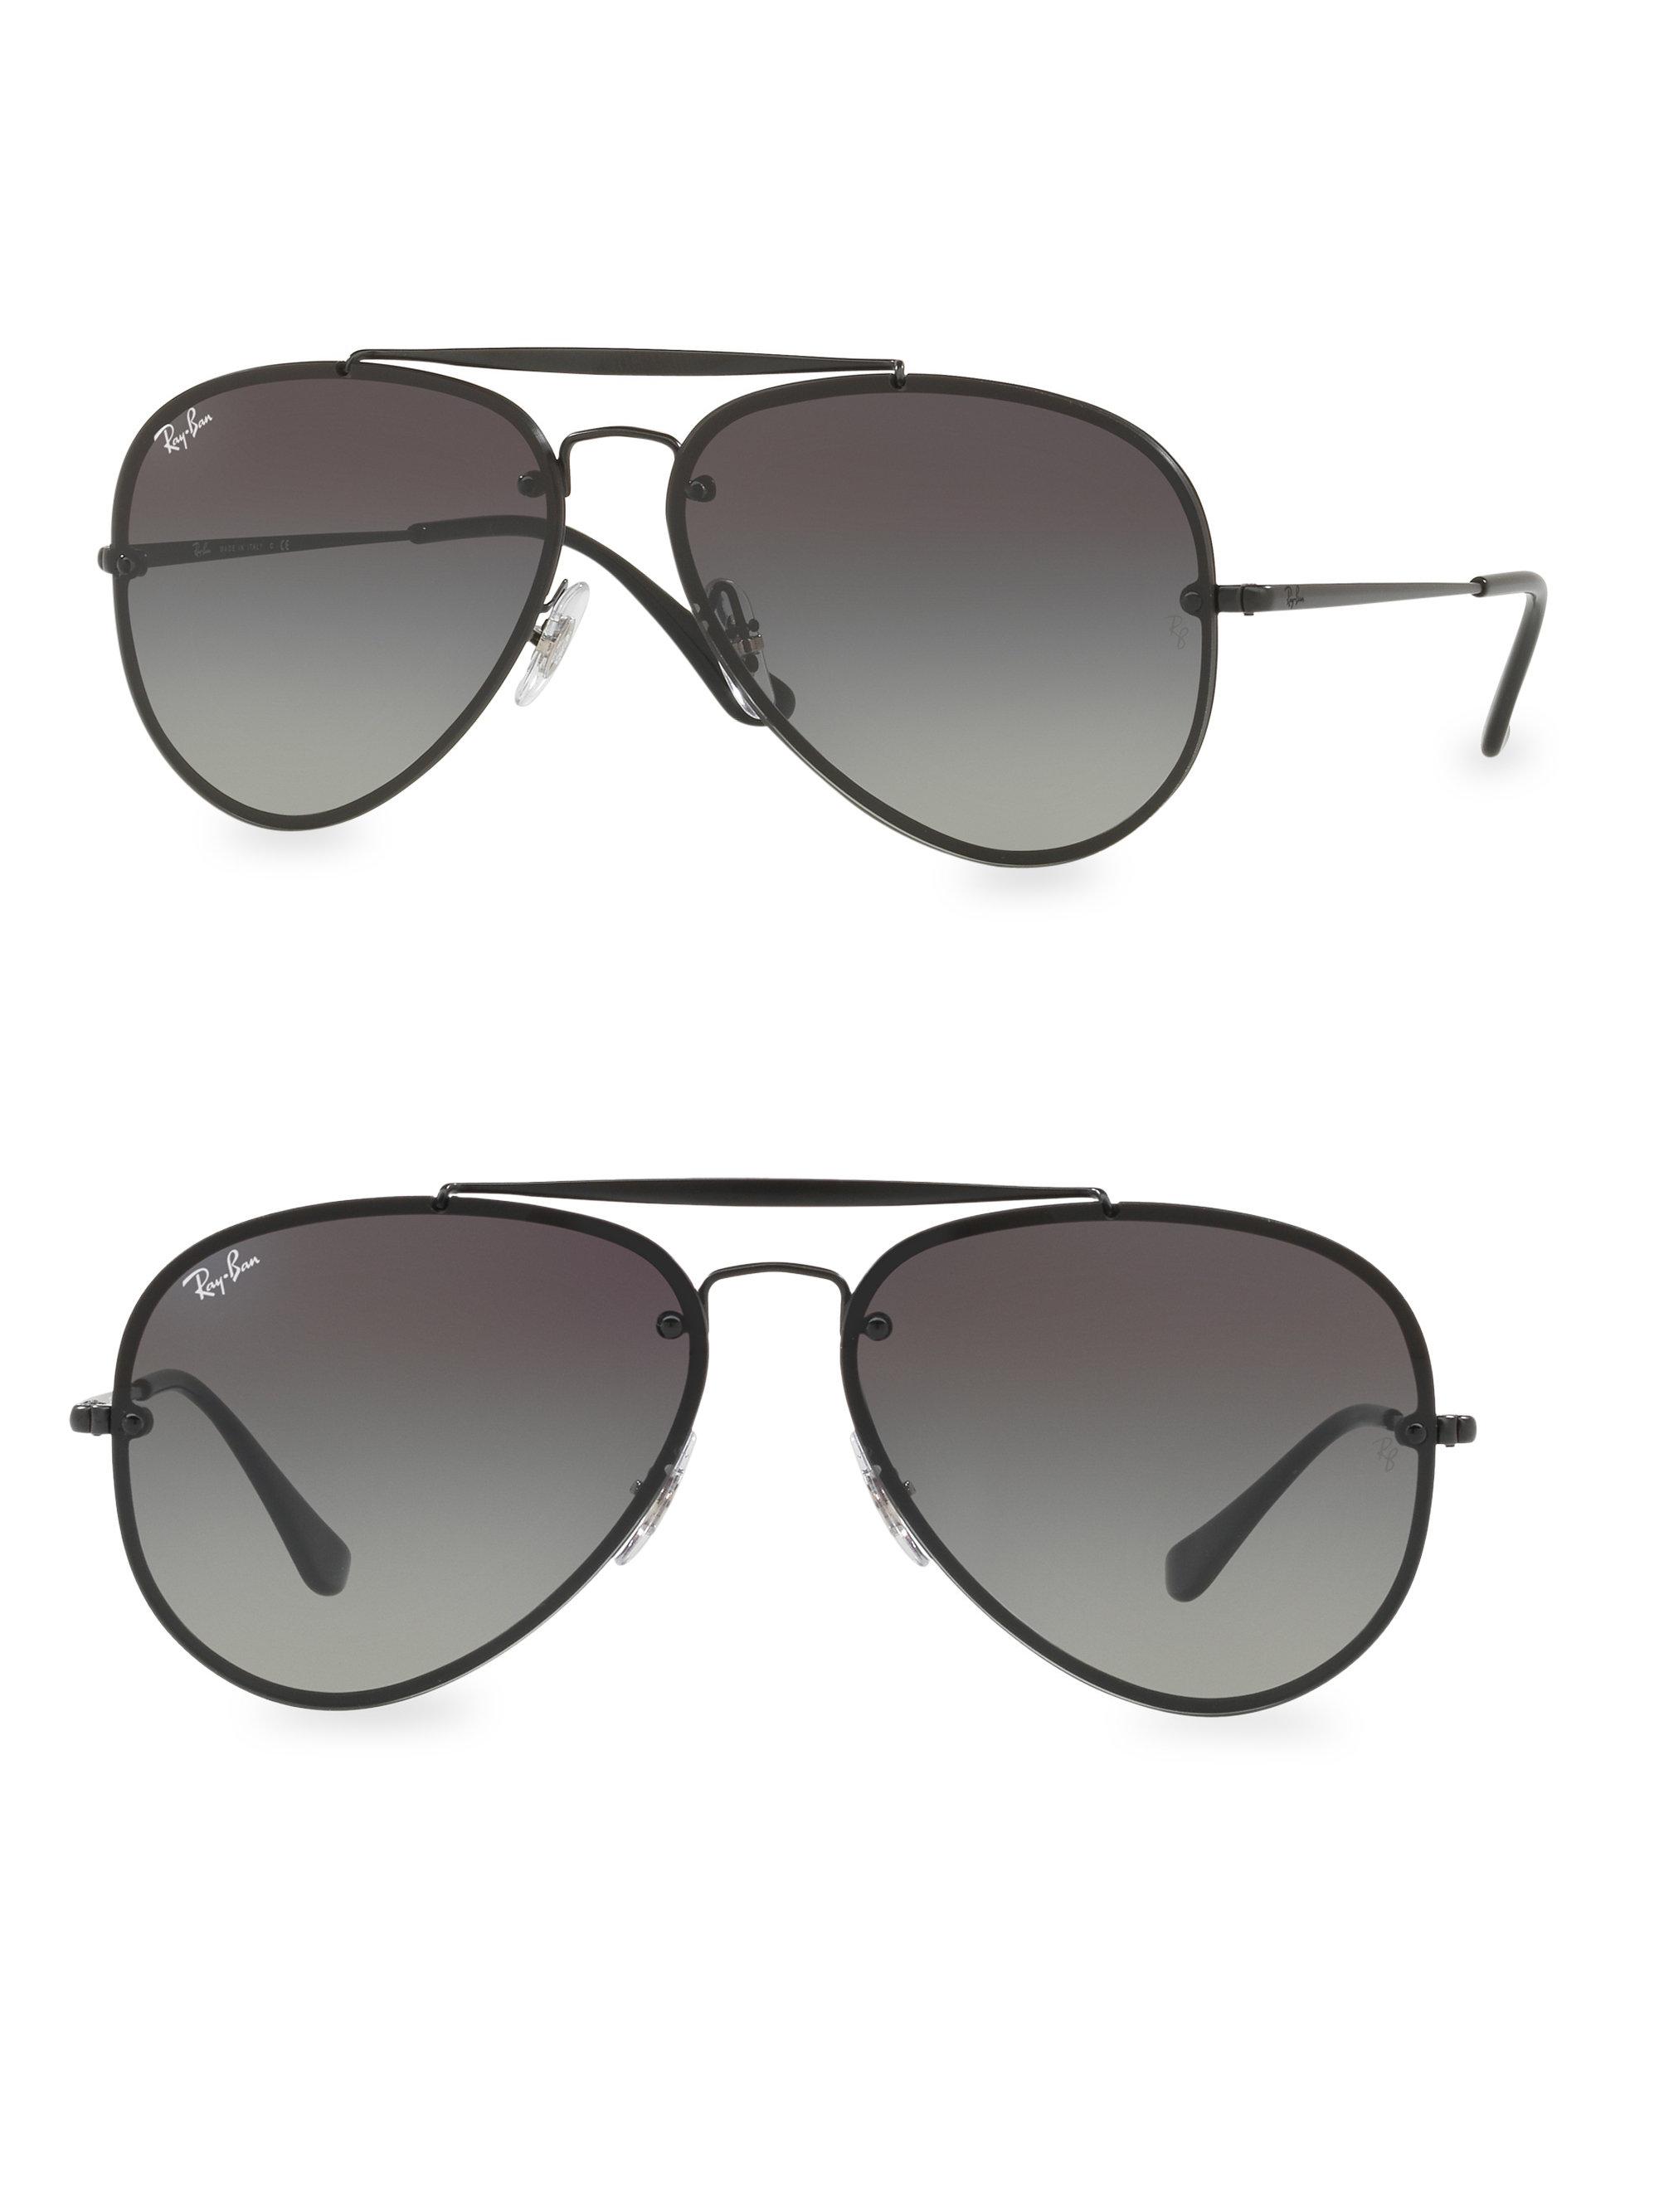 Lyst Ray Ban Iconic Aviator Sunglasses In Black For Men 